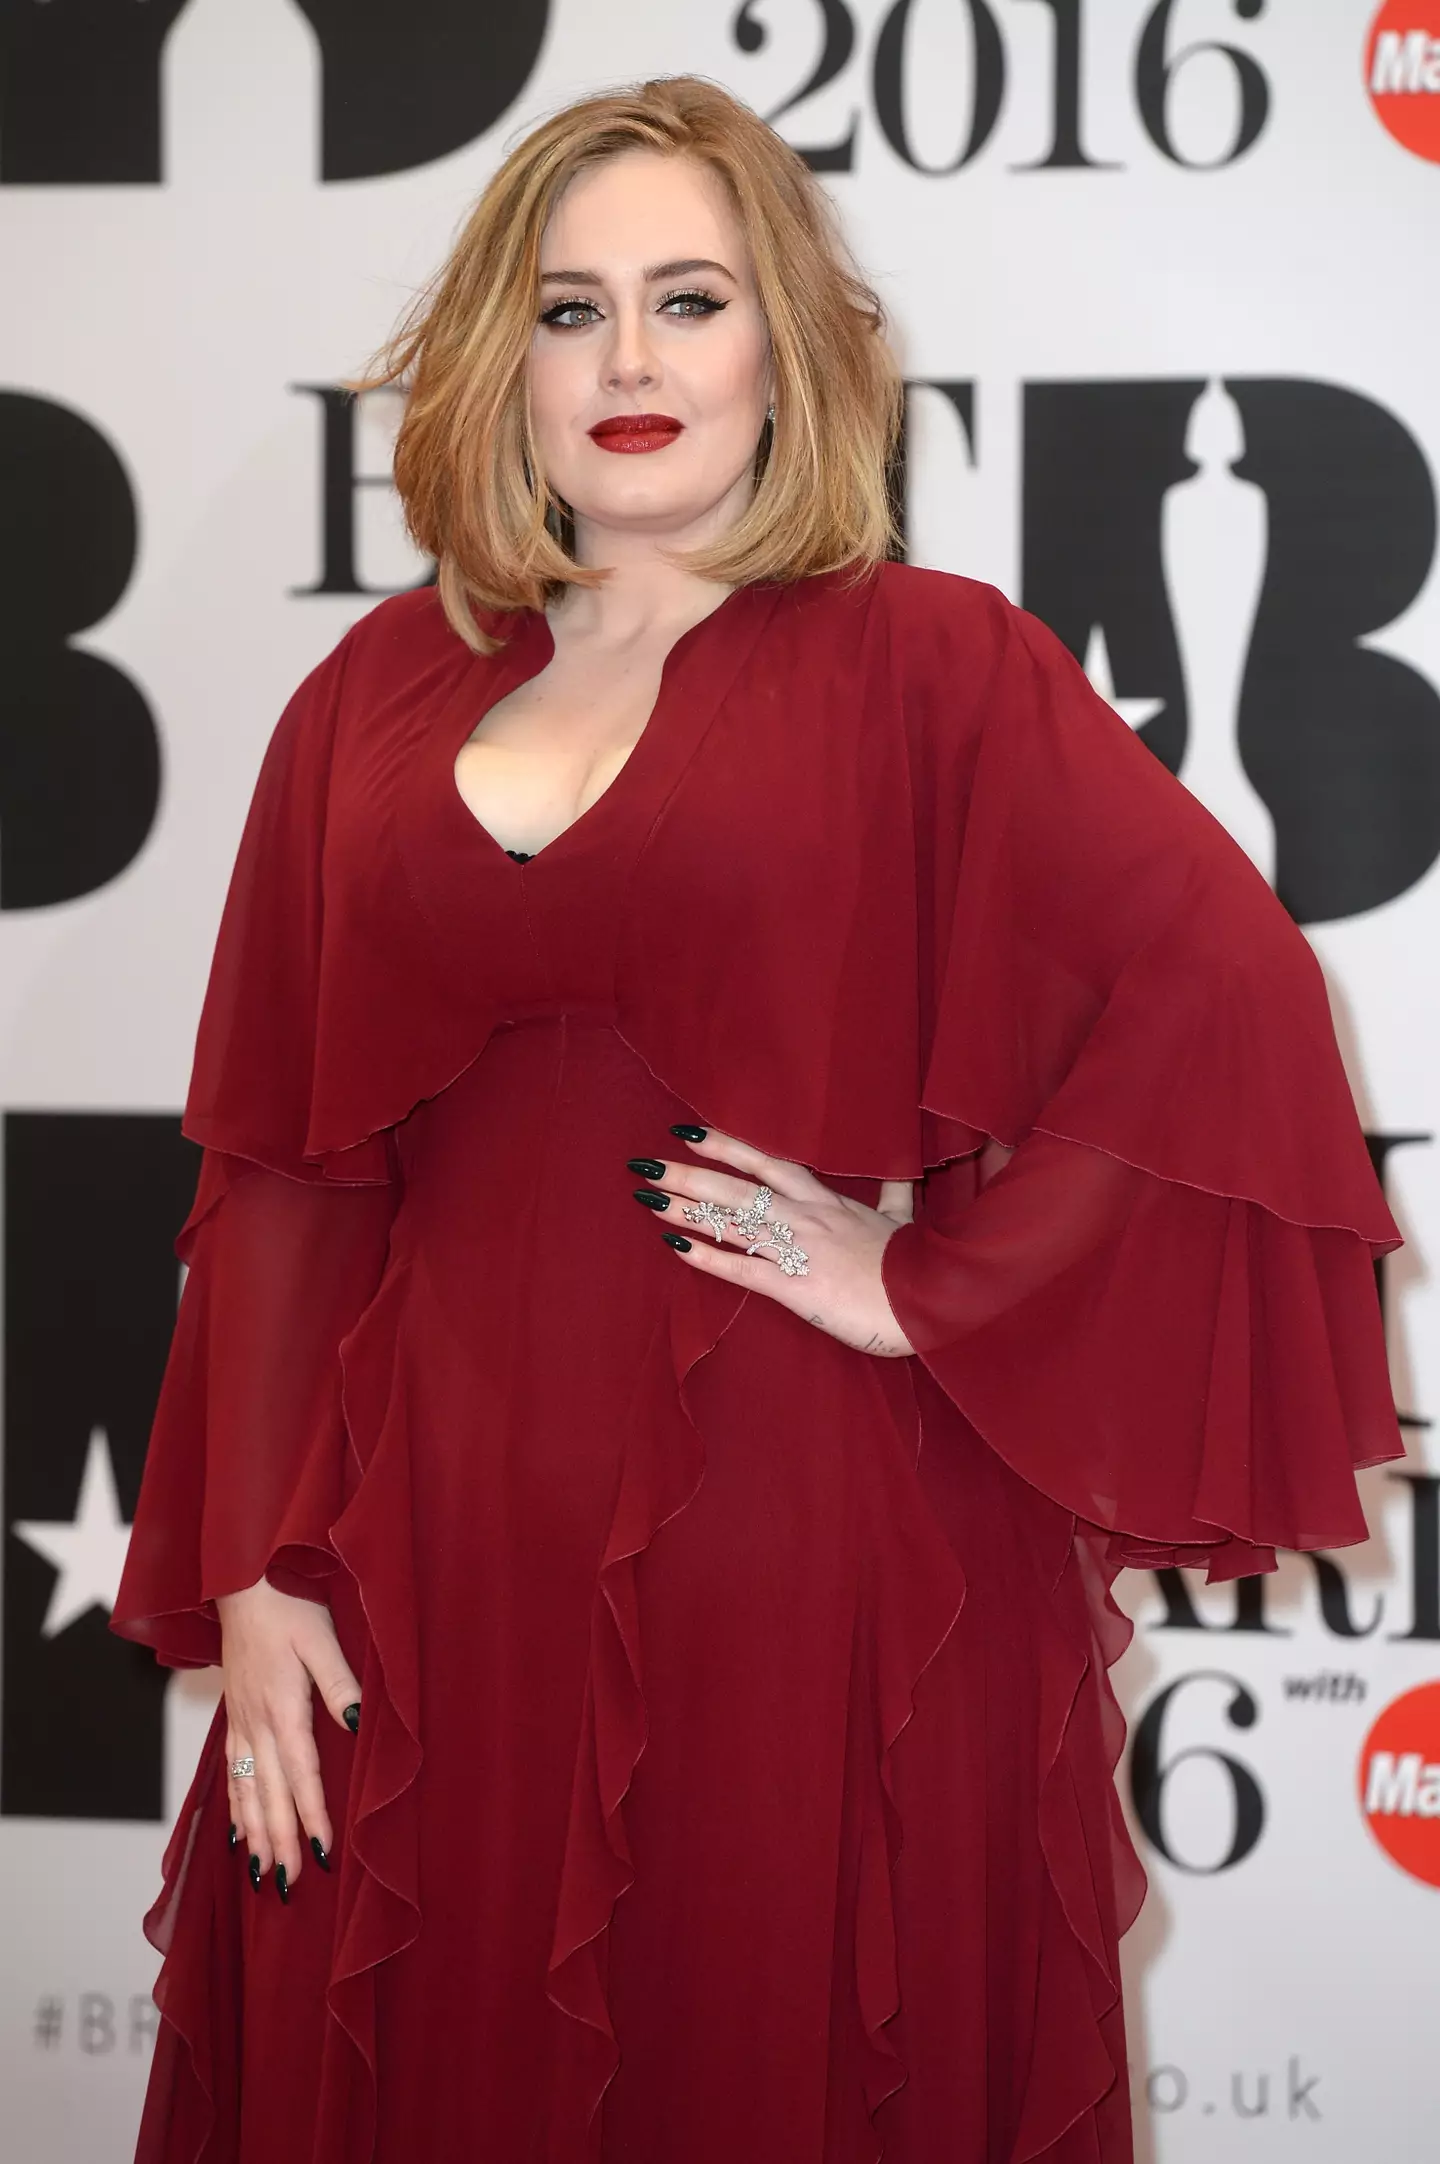 Adele said she didn't want to look like women in magazines (